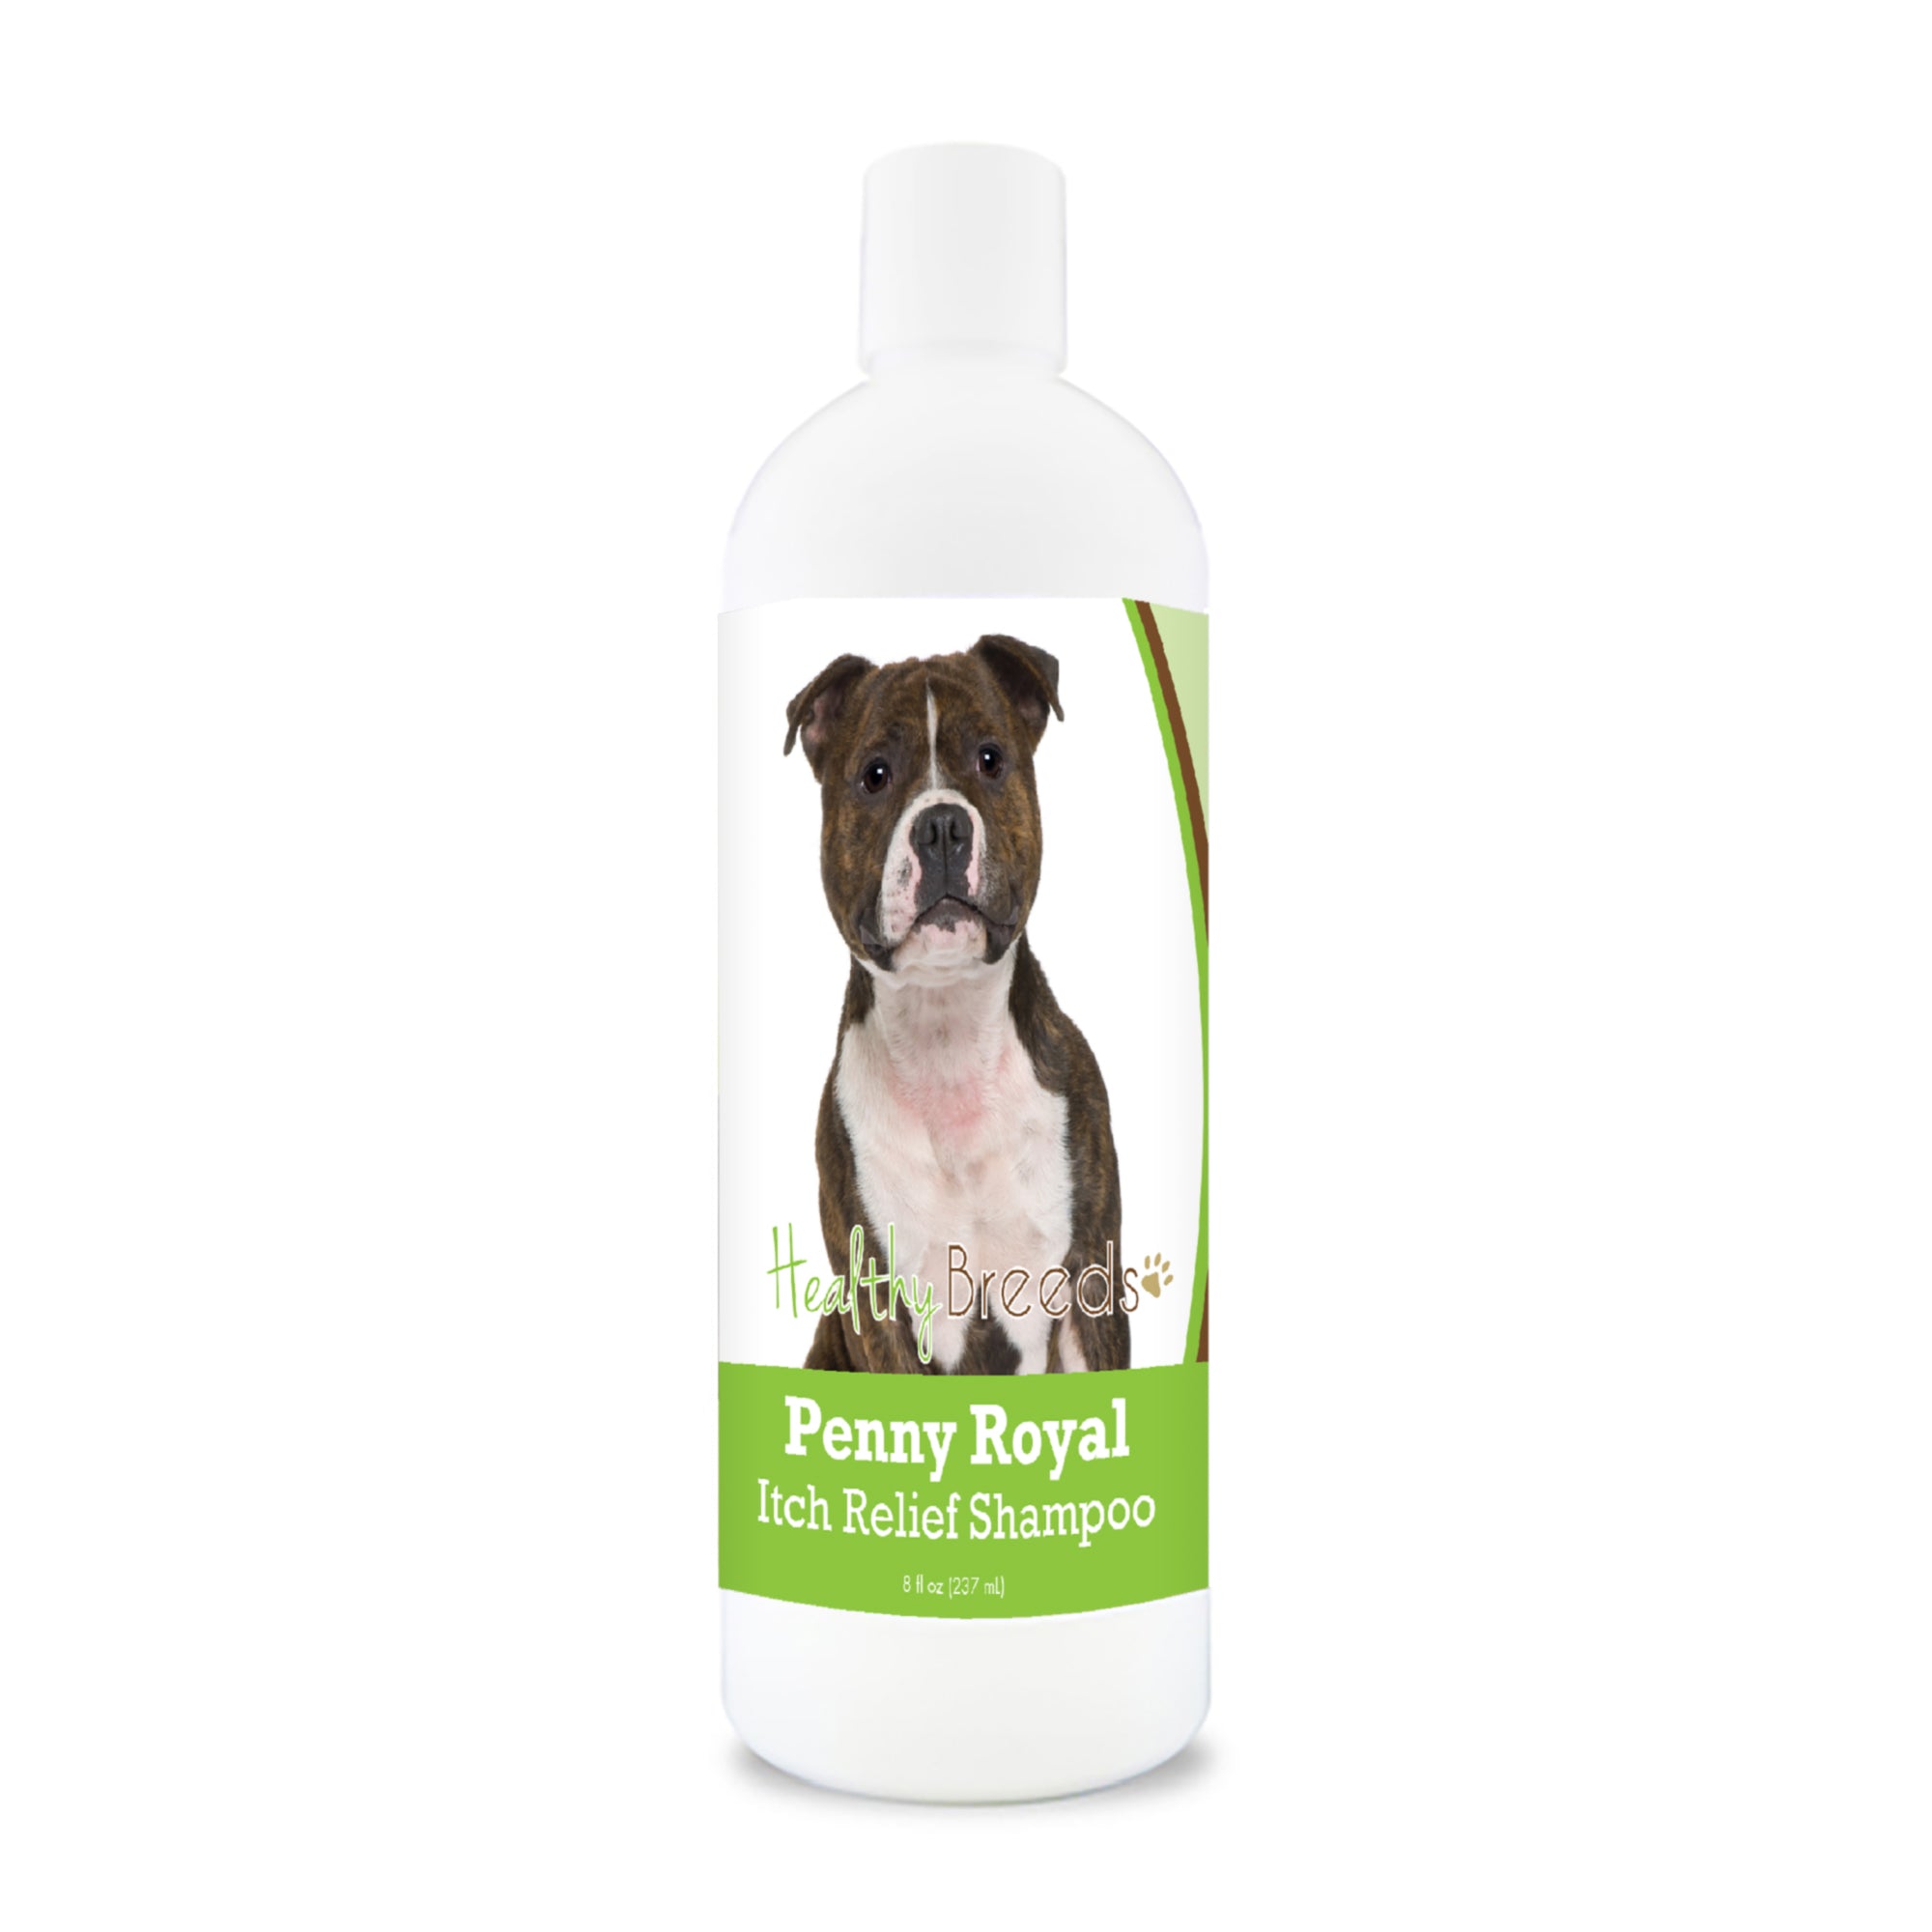 Staffordshire Bull Terrier Penny Royal Itch Relief Shampoo 8 oz